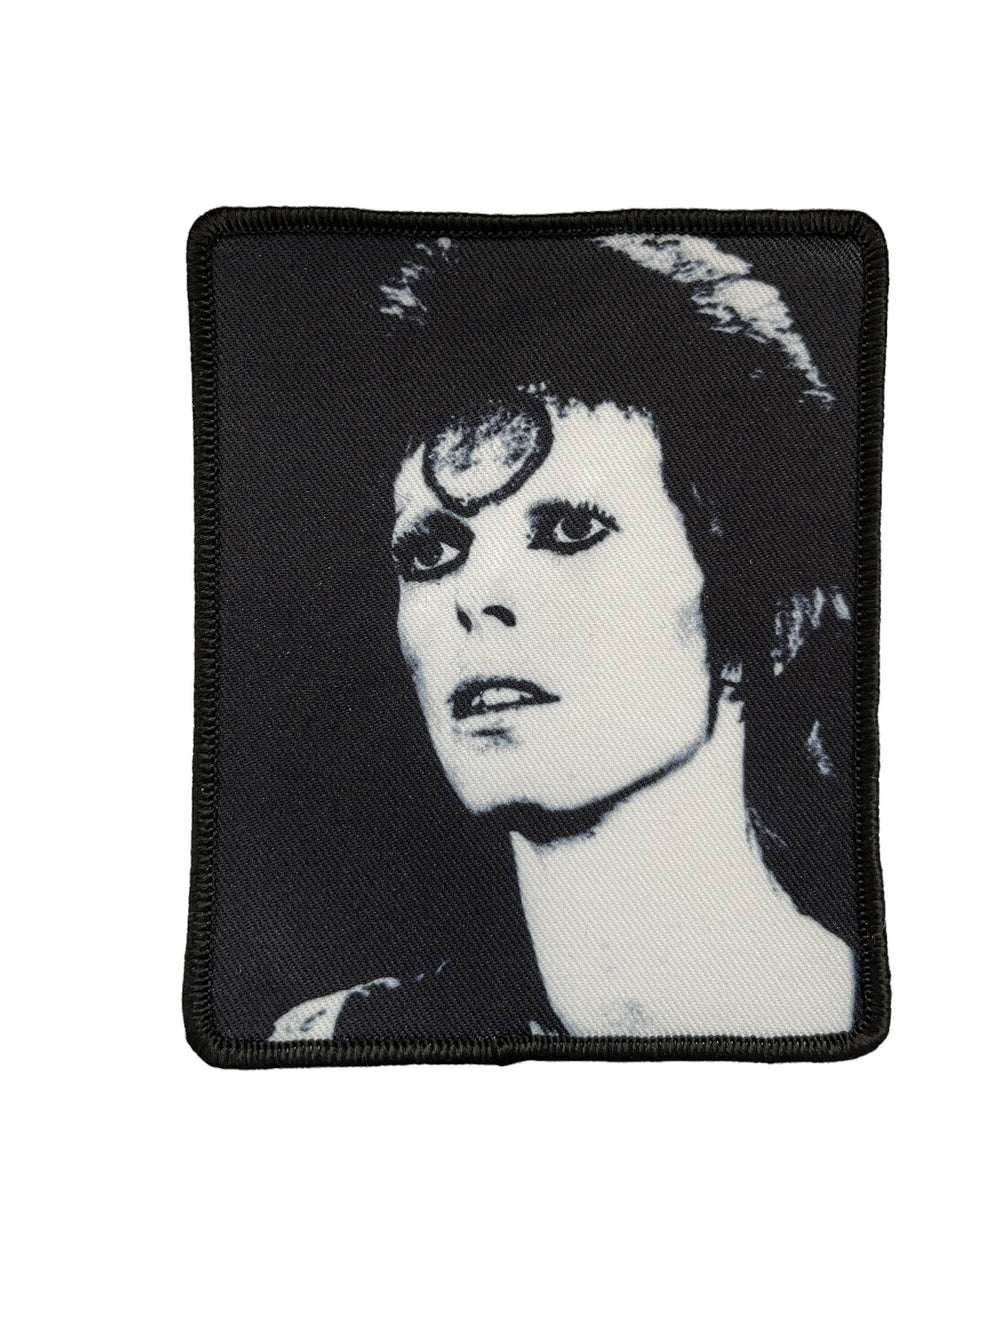 David Bowie Ziggy Profile Official Woven Patch Brand New